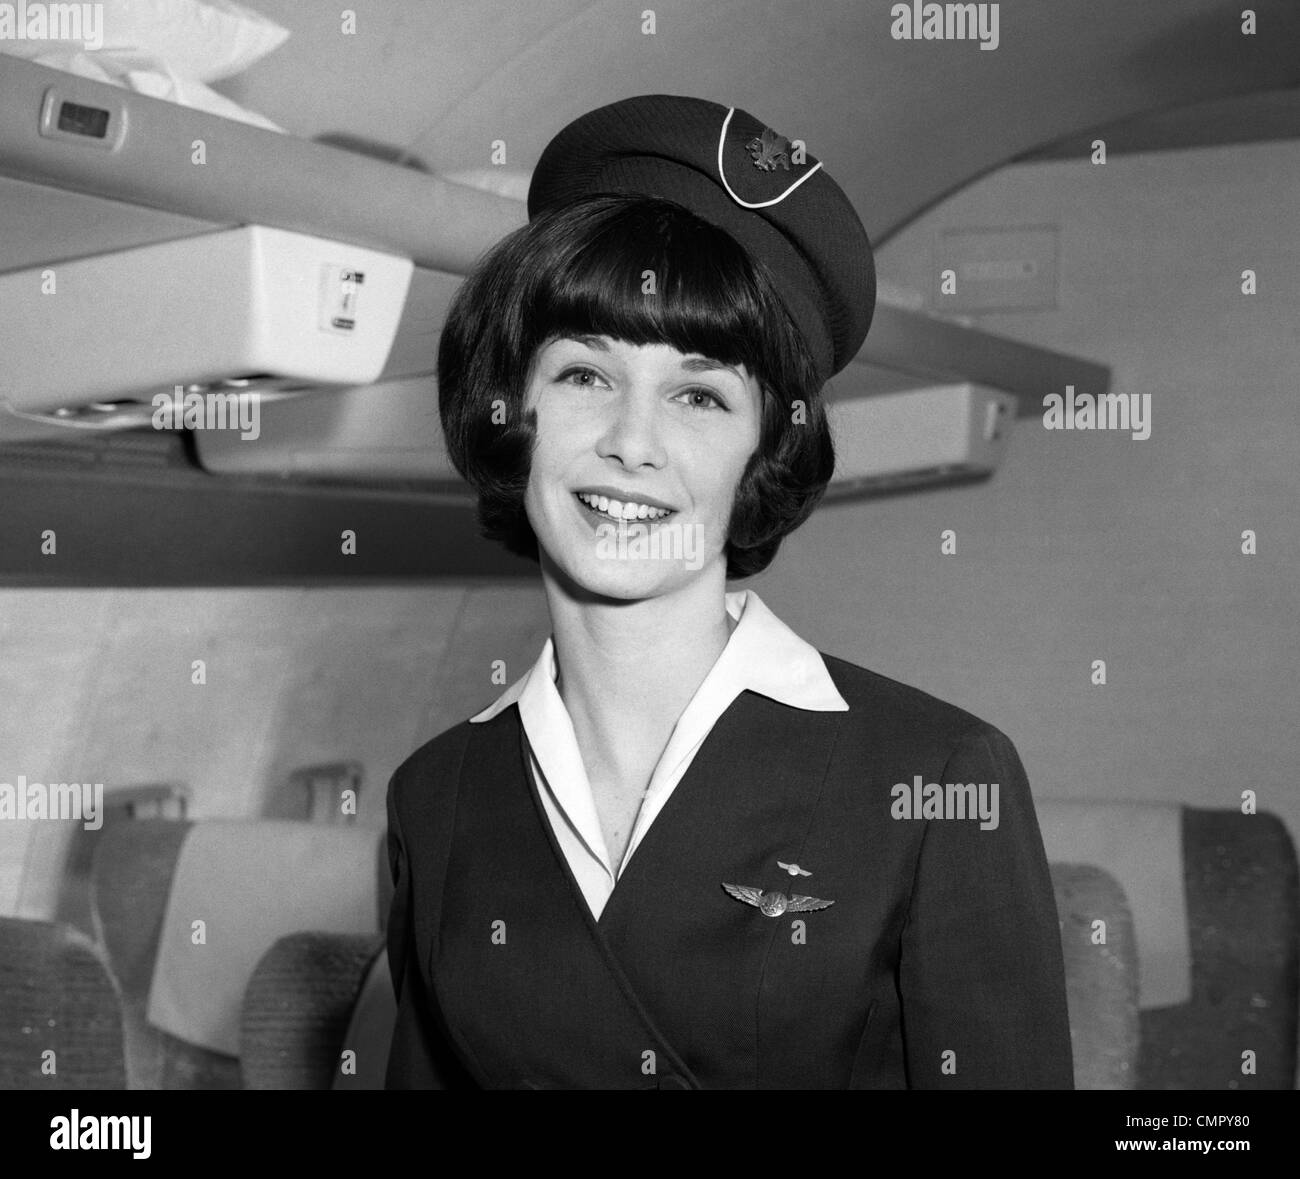 1960s SMILING PORTRAIT OF AIRLINE STEWARDESS IN AIRPLANE AISLE Stock Photo